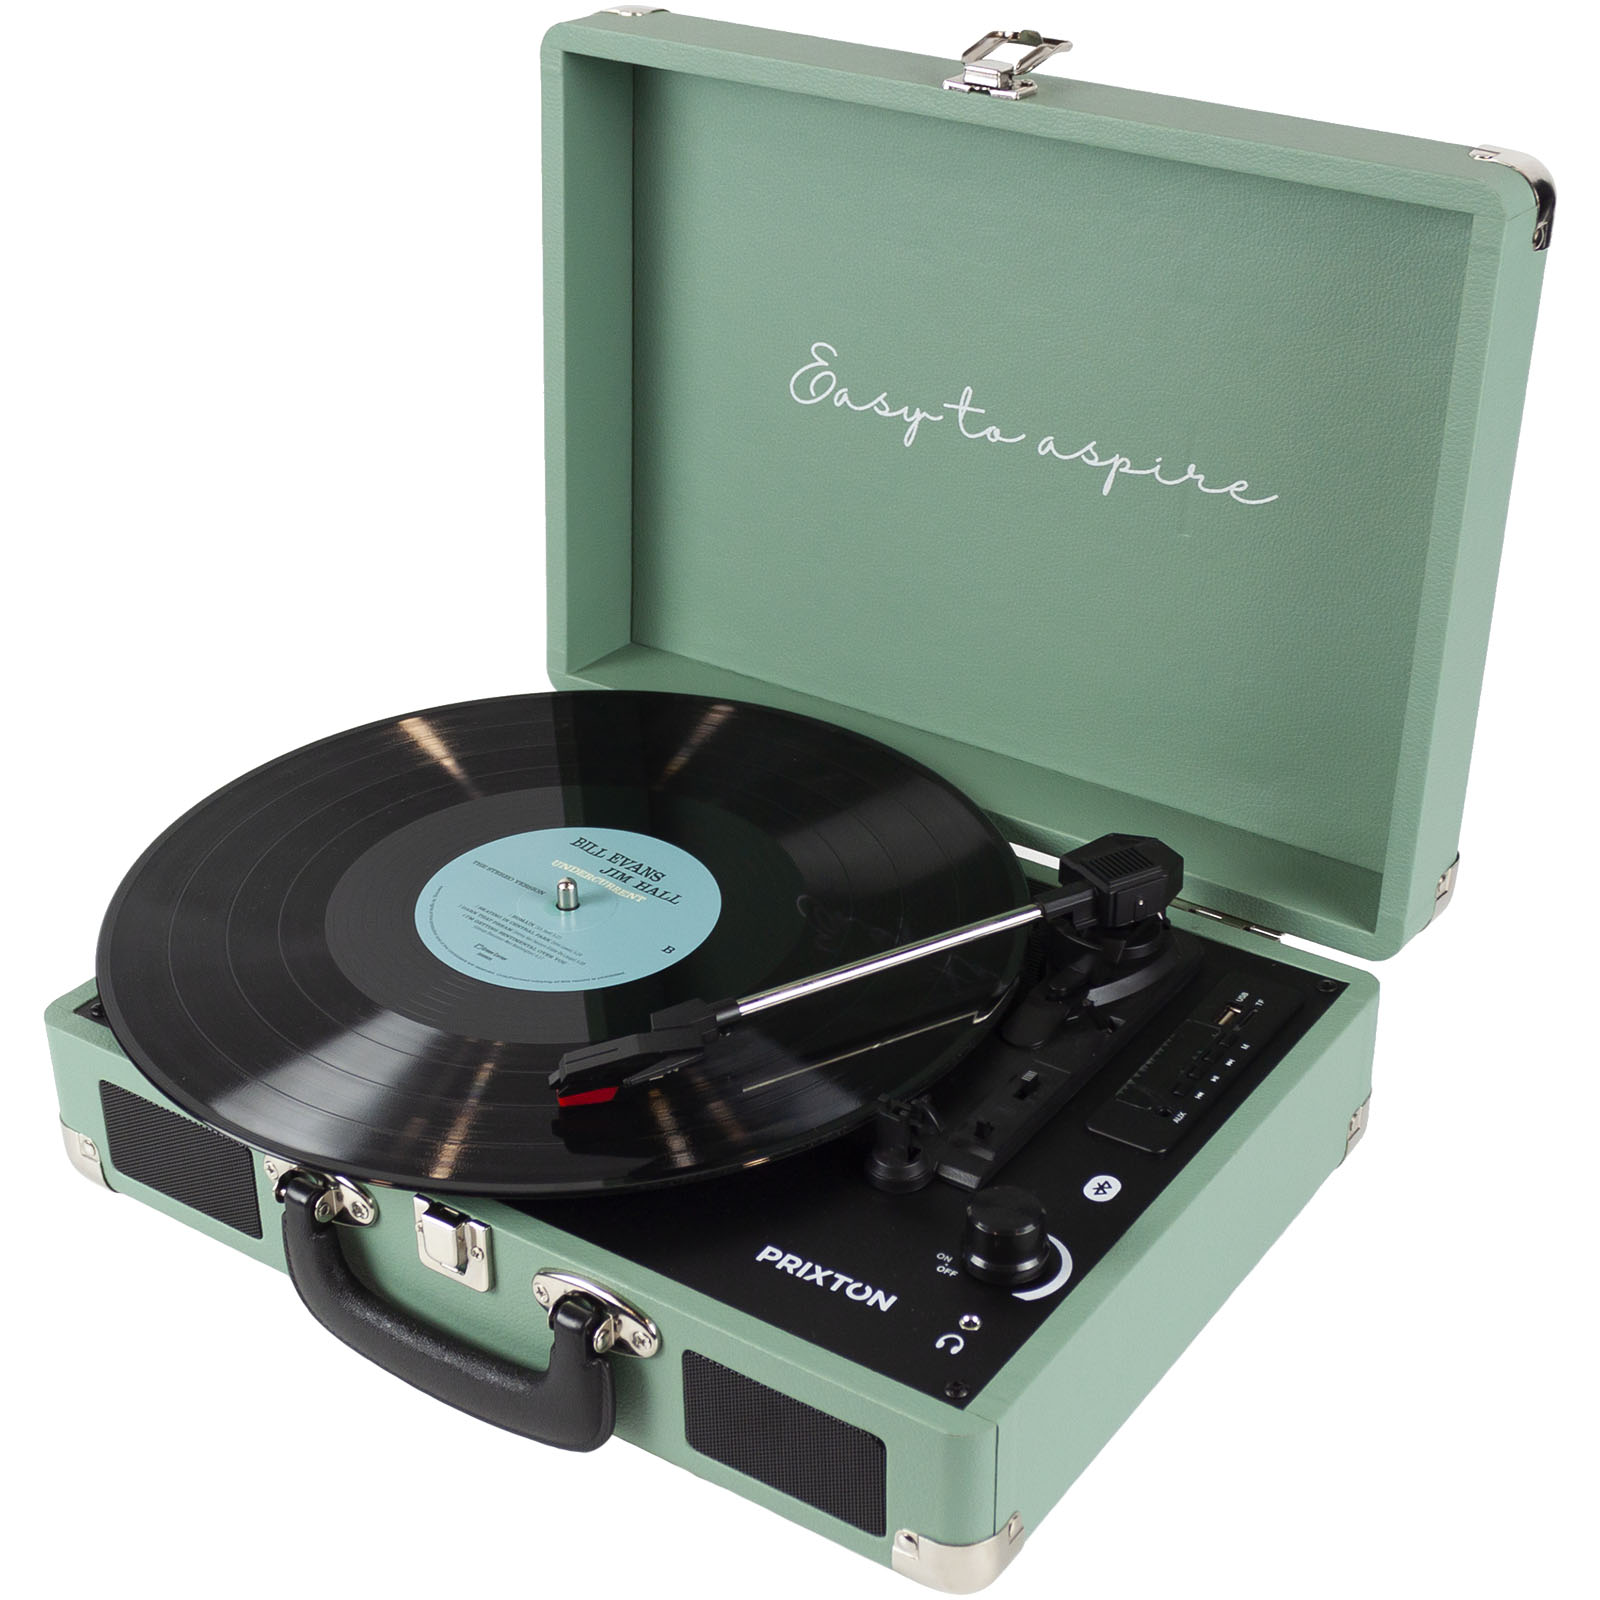 A turntable that has the appearance of a briefcase and is made from vinyl - Plungar